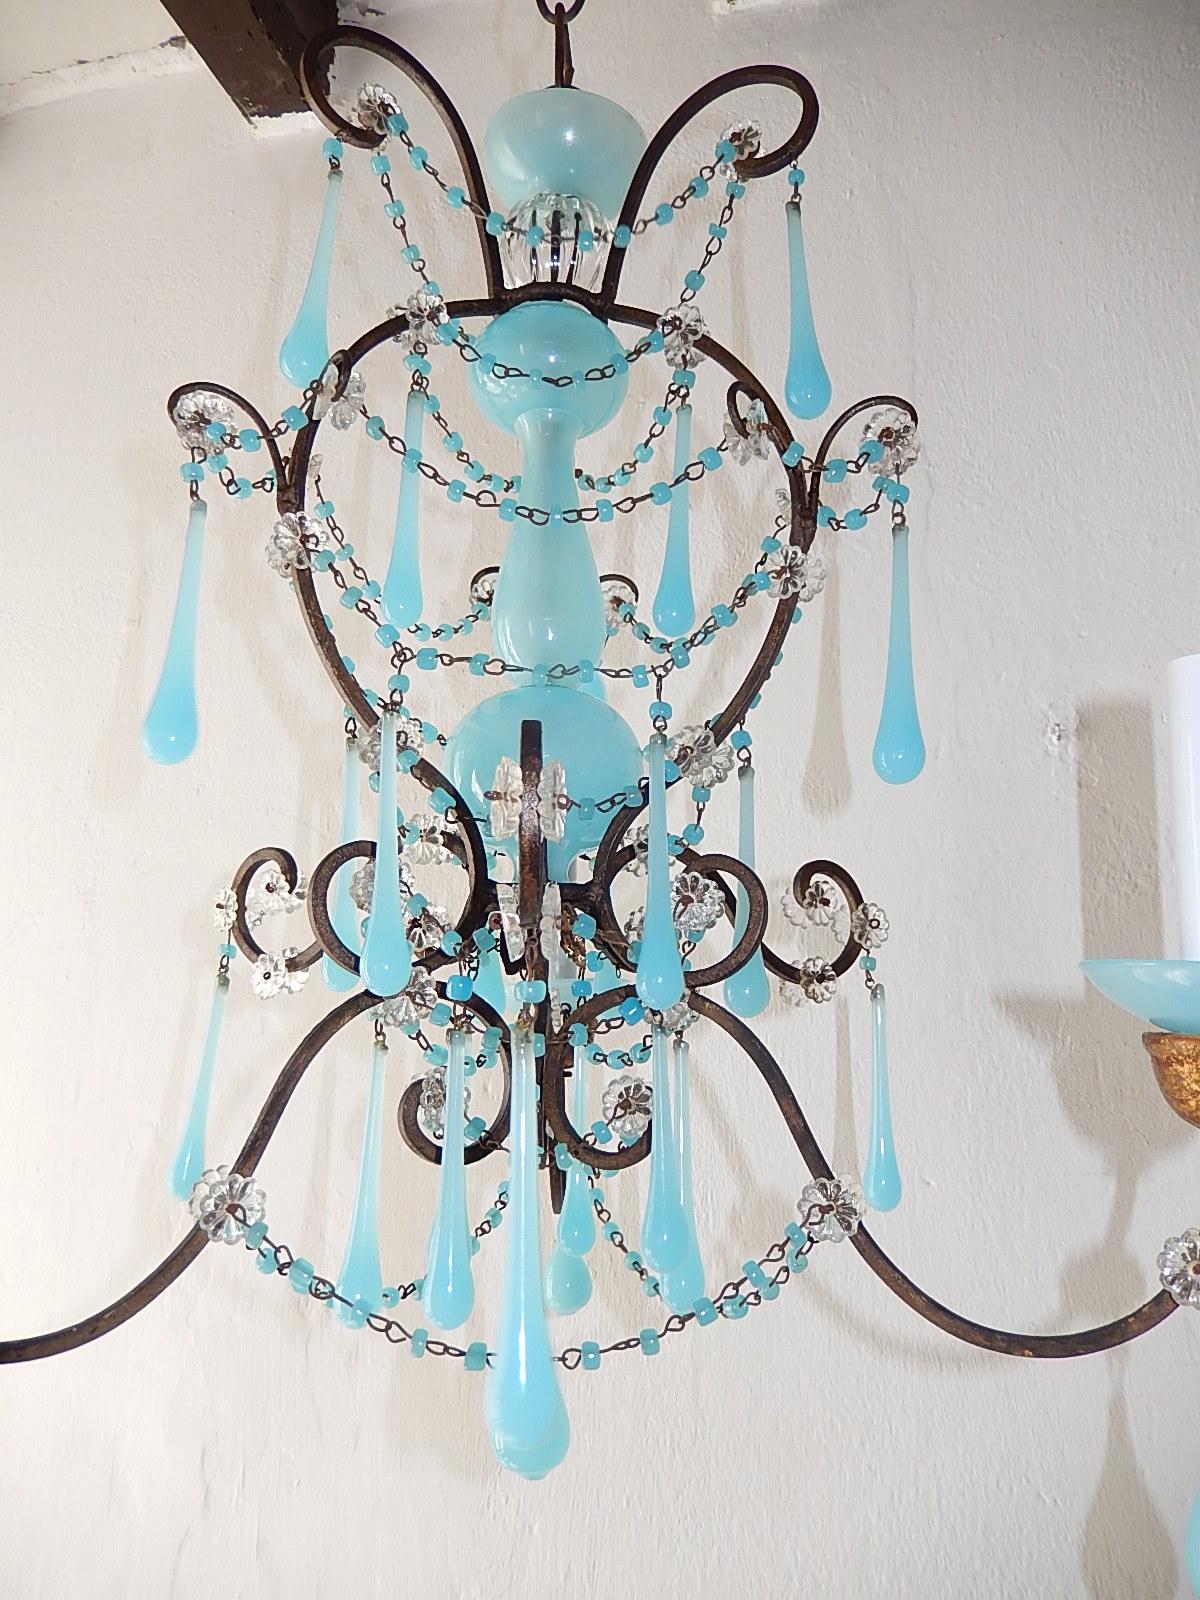 Early 20th Century French Aqua Blue Opaline Murano Drops and Bobeches Chandelier, circa 1900